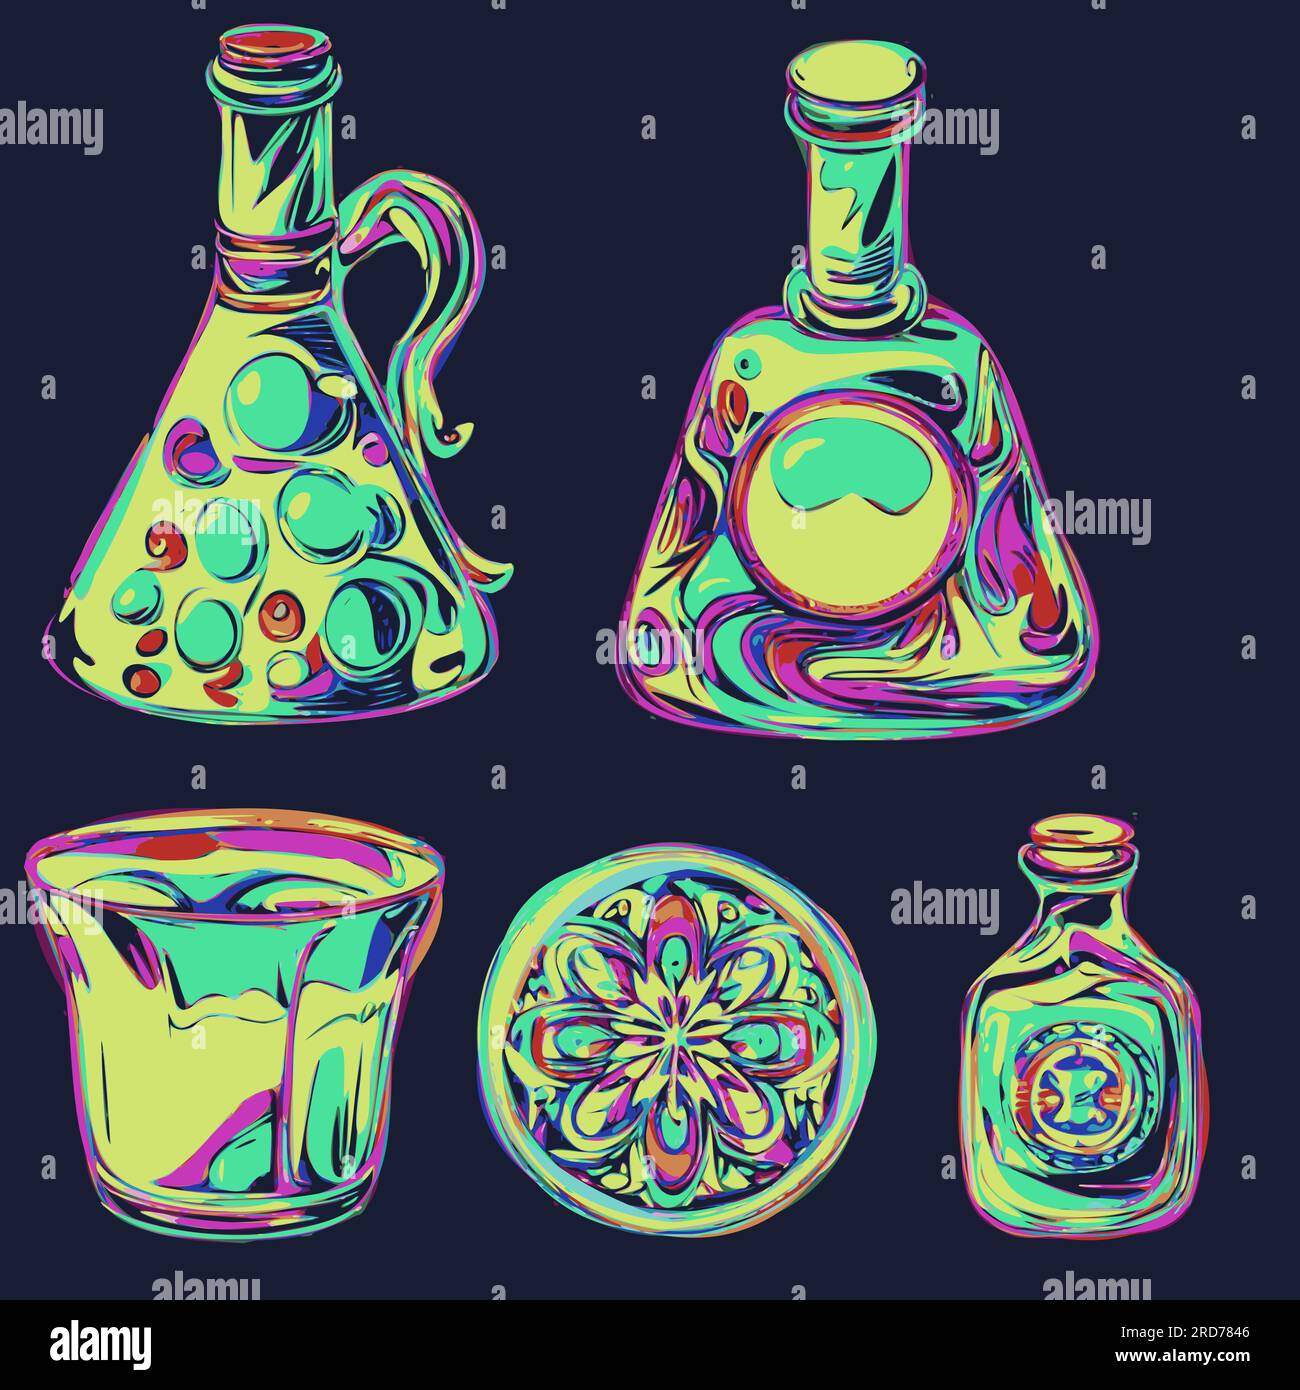 Absinthe bottles in psychedelic style. decanters and glasses in acid colors. vector set on a black background Stock Vector